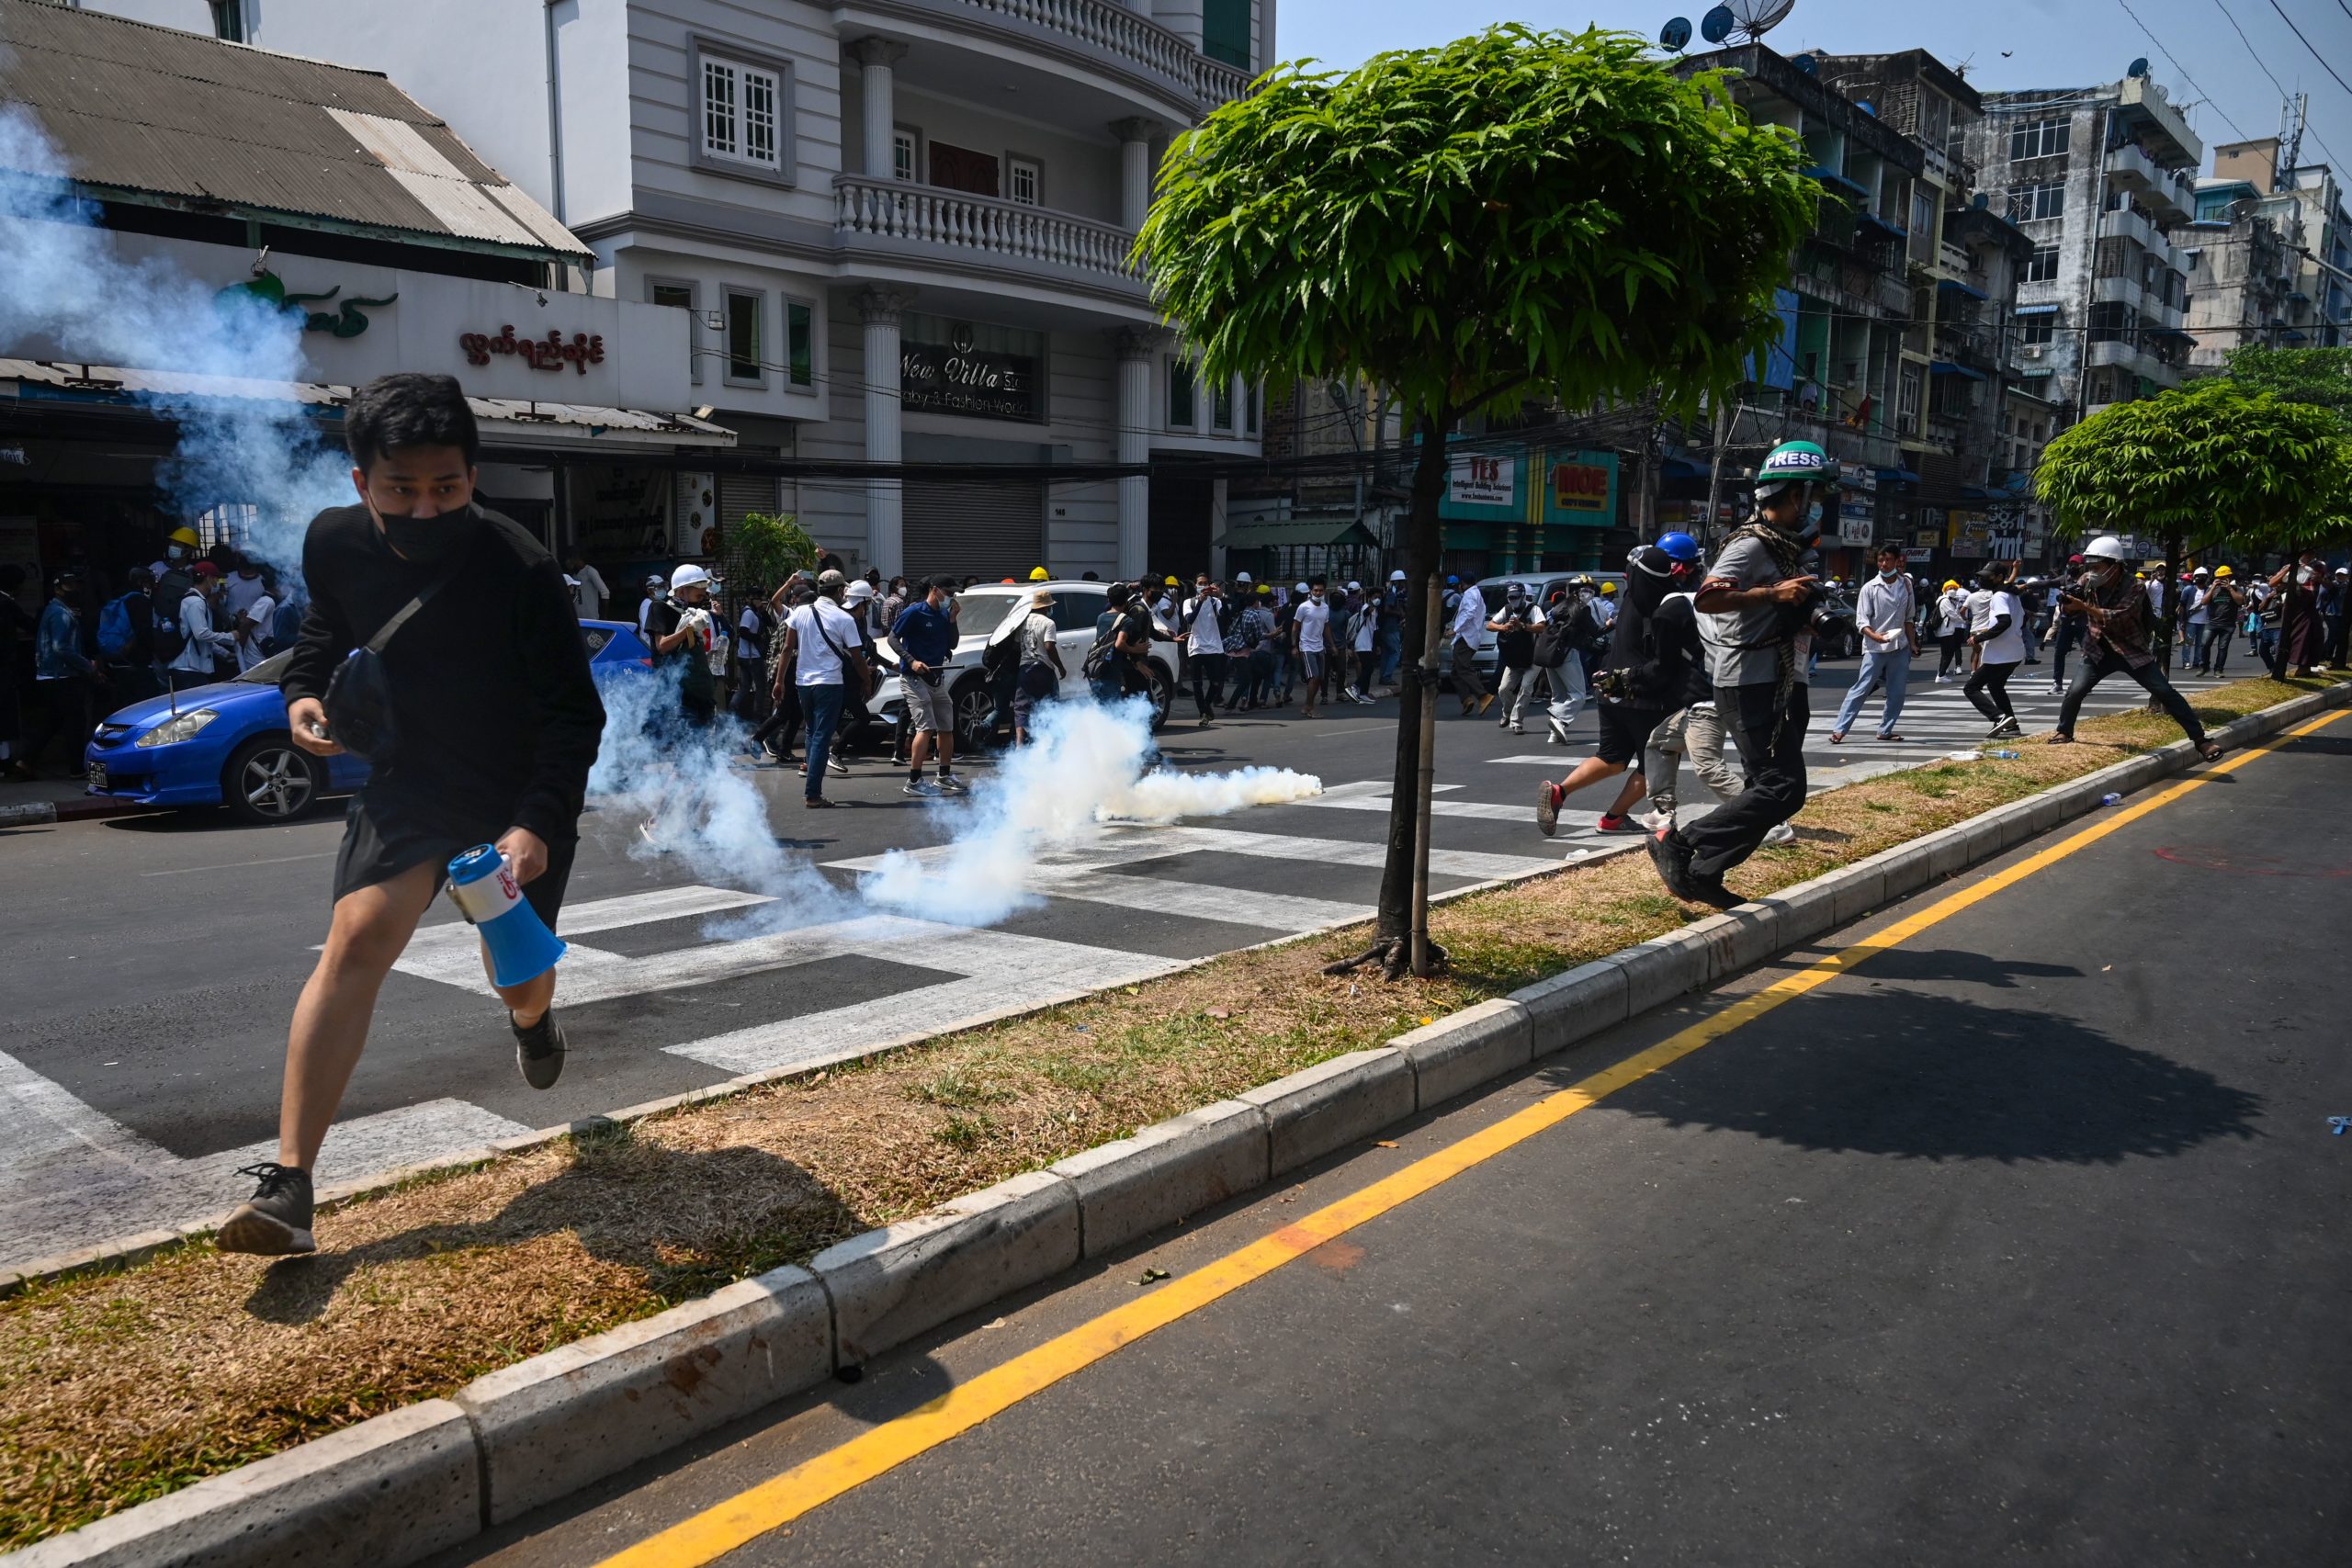 Protesters run after police fired tear gas to disperse them during a demonstration against the military coup in Yangon on February 28, 2021. (Photo by Sai Aung Main / AFP) (Photo by SAI AUNG MAIN/AFP via Getty Images)